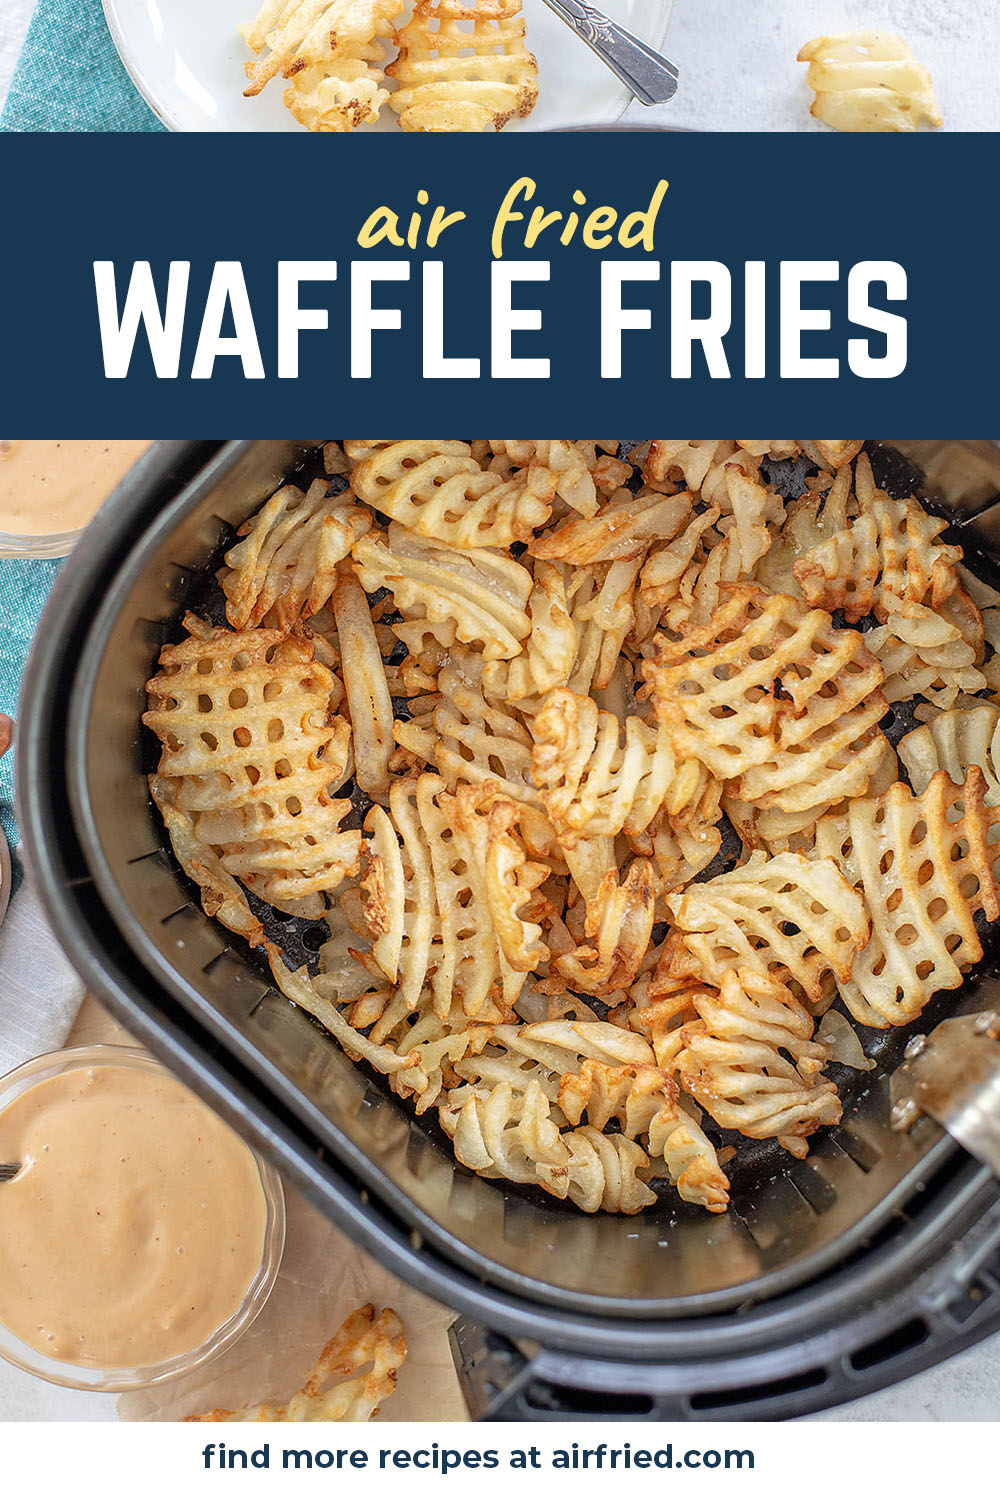 I enjoy waffle fries mostly for their texture and the air fryer is capable of cooking them perfectly!